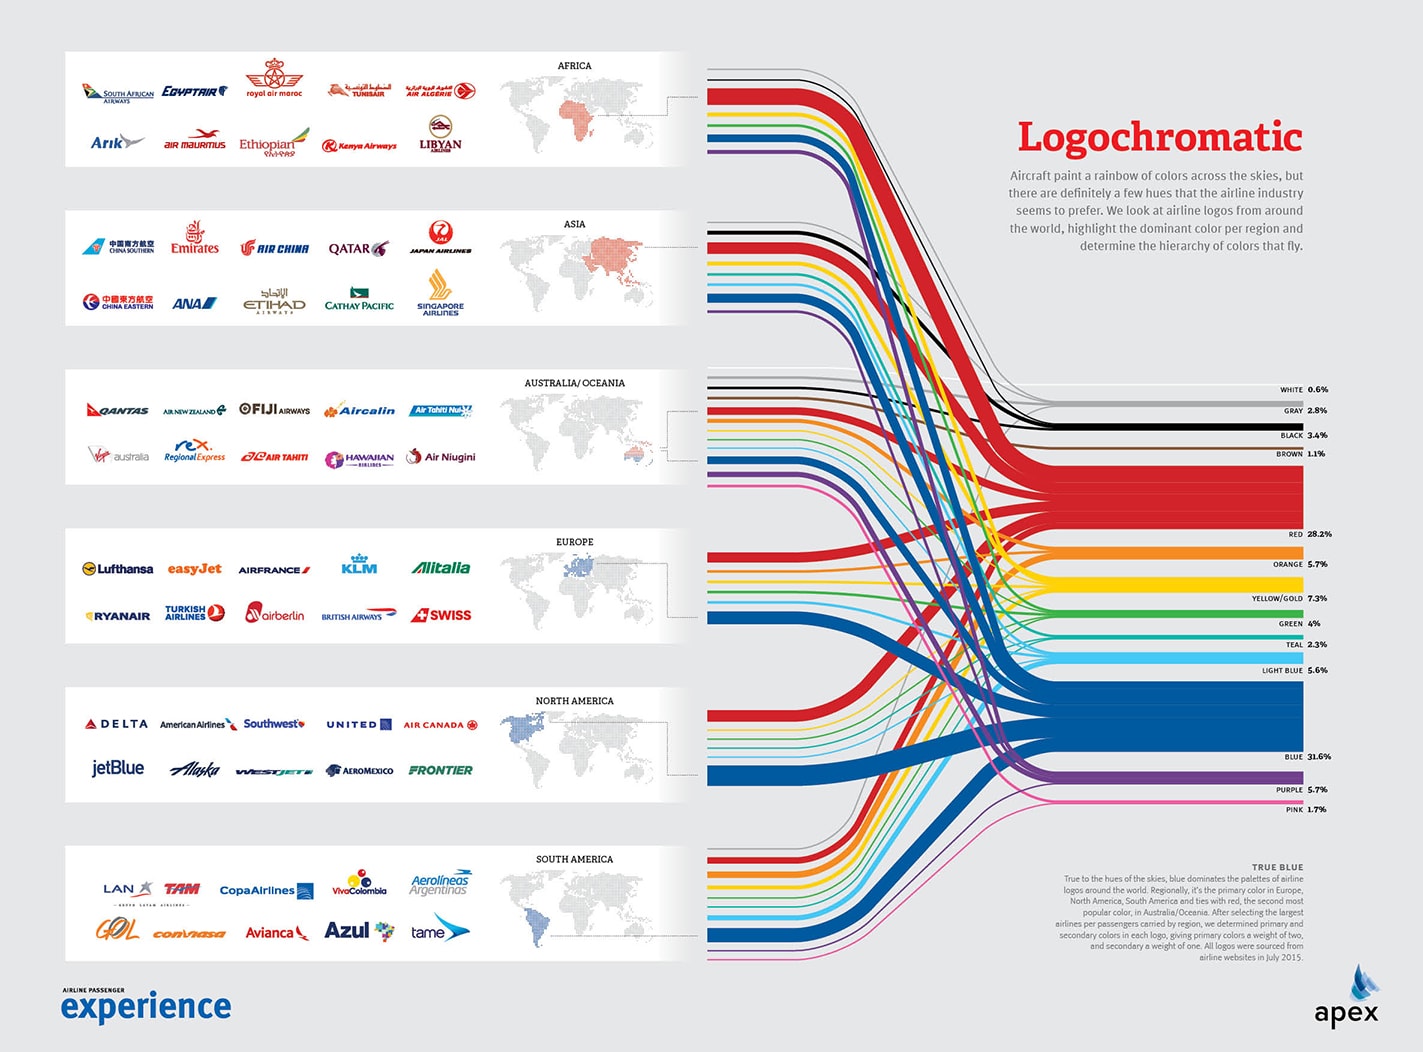 Logochromatic Airline Brand Colors By Region Apex